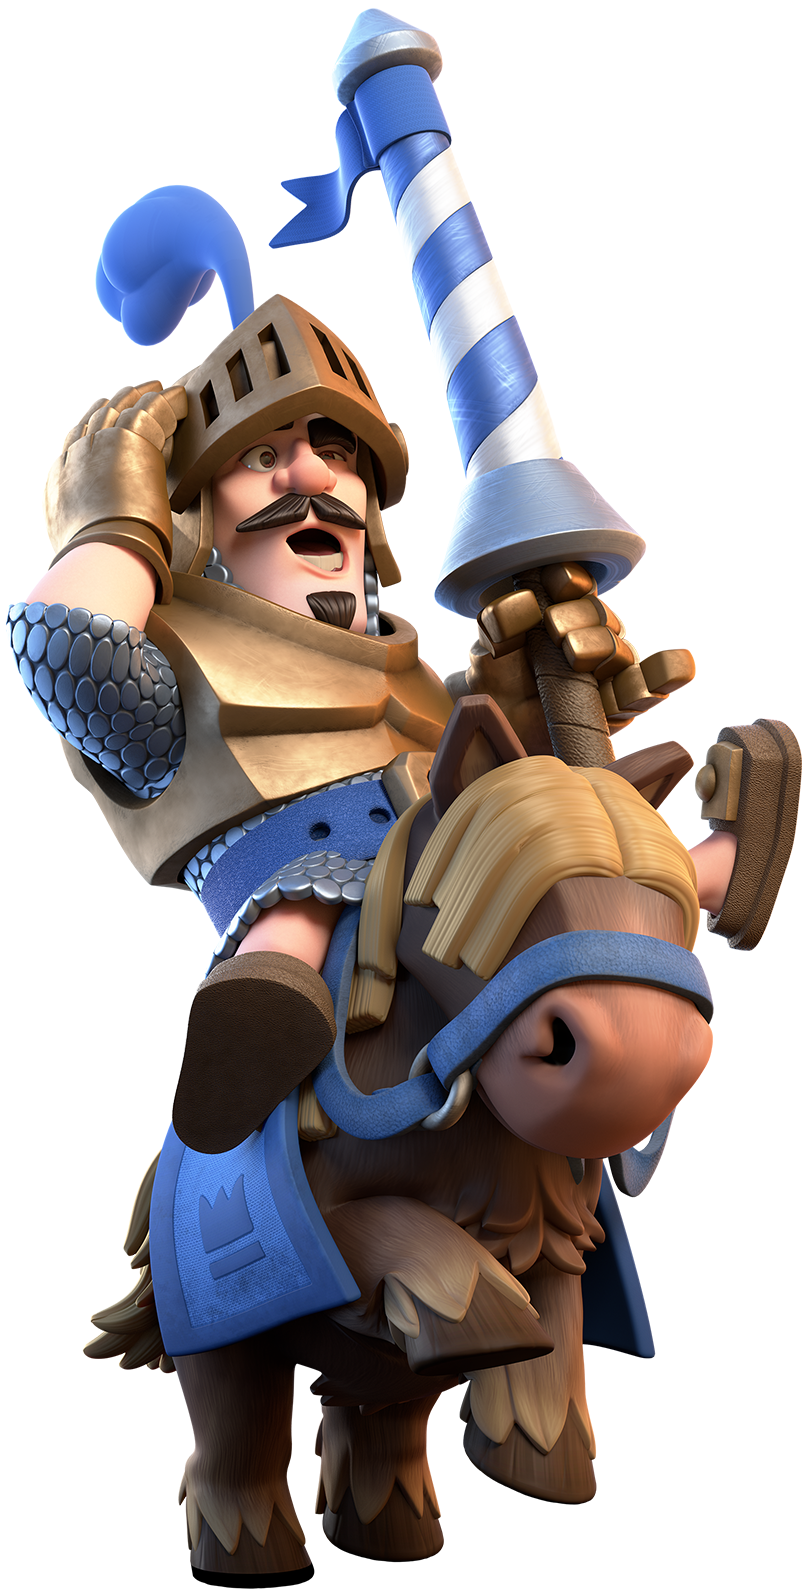 clash of clans hd wallpaper for android,animated cartoon,action figure,cartoon,figurine,toy